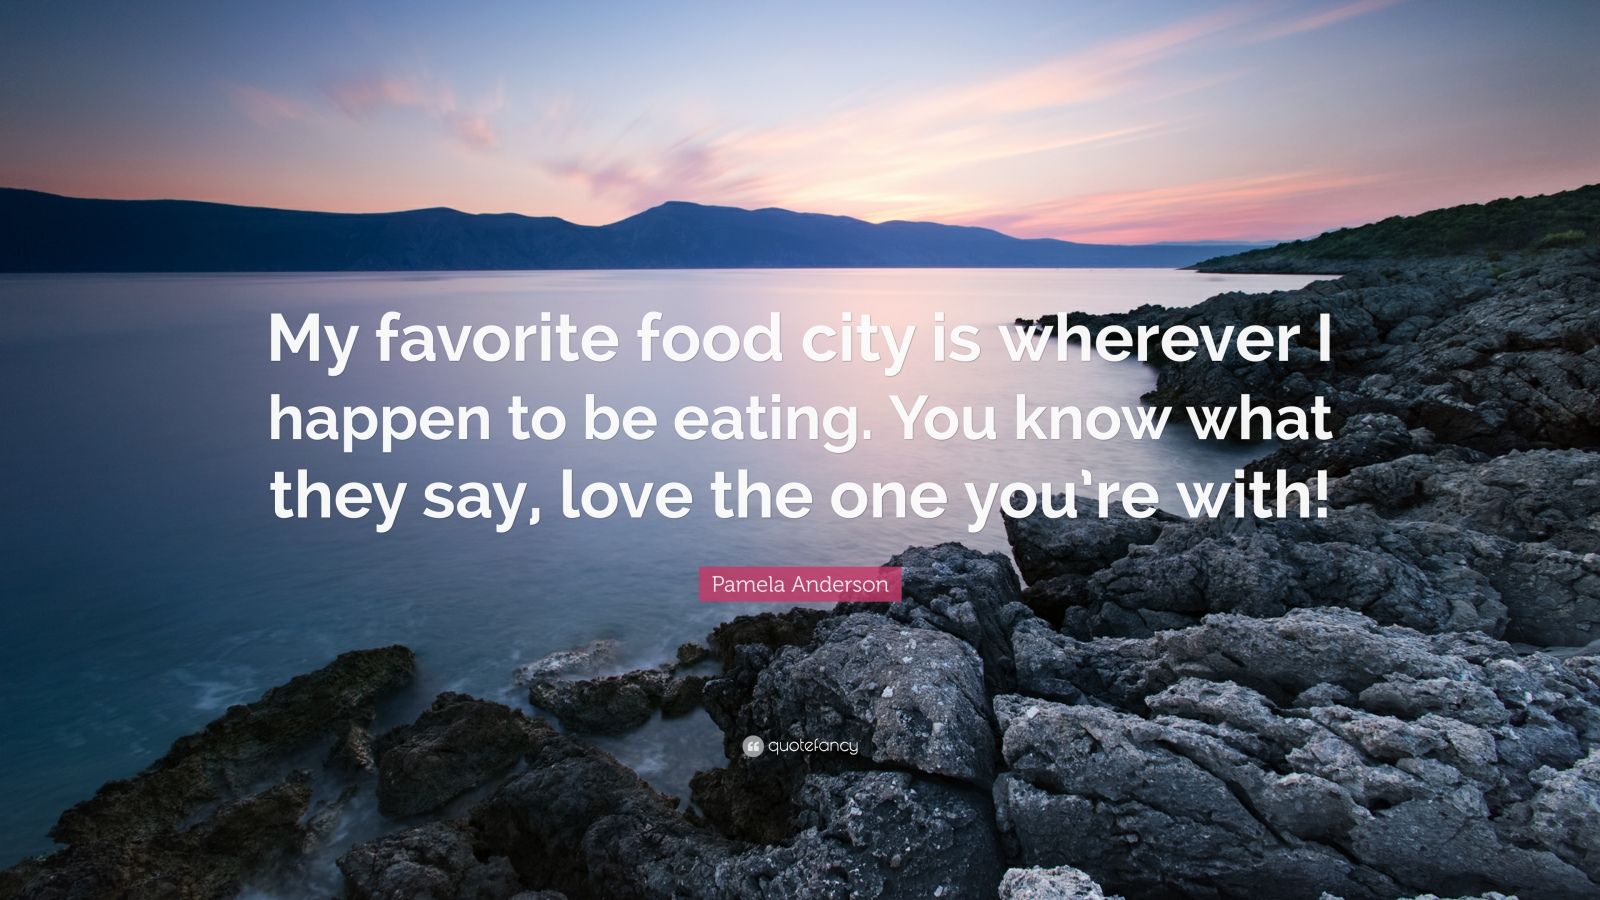 Pamela Anderson Quote “My favorite food city is wherever I happen to be eating